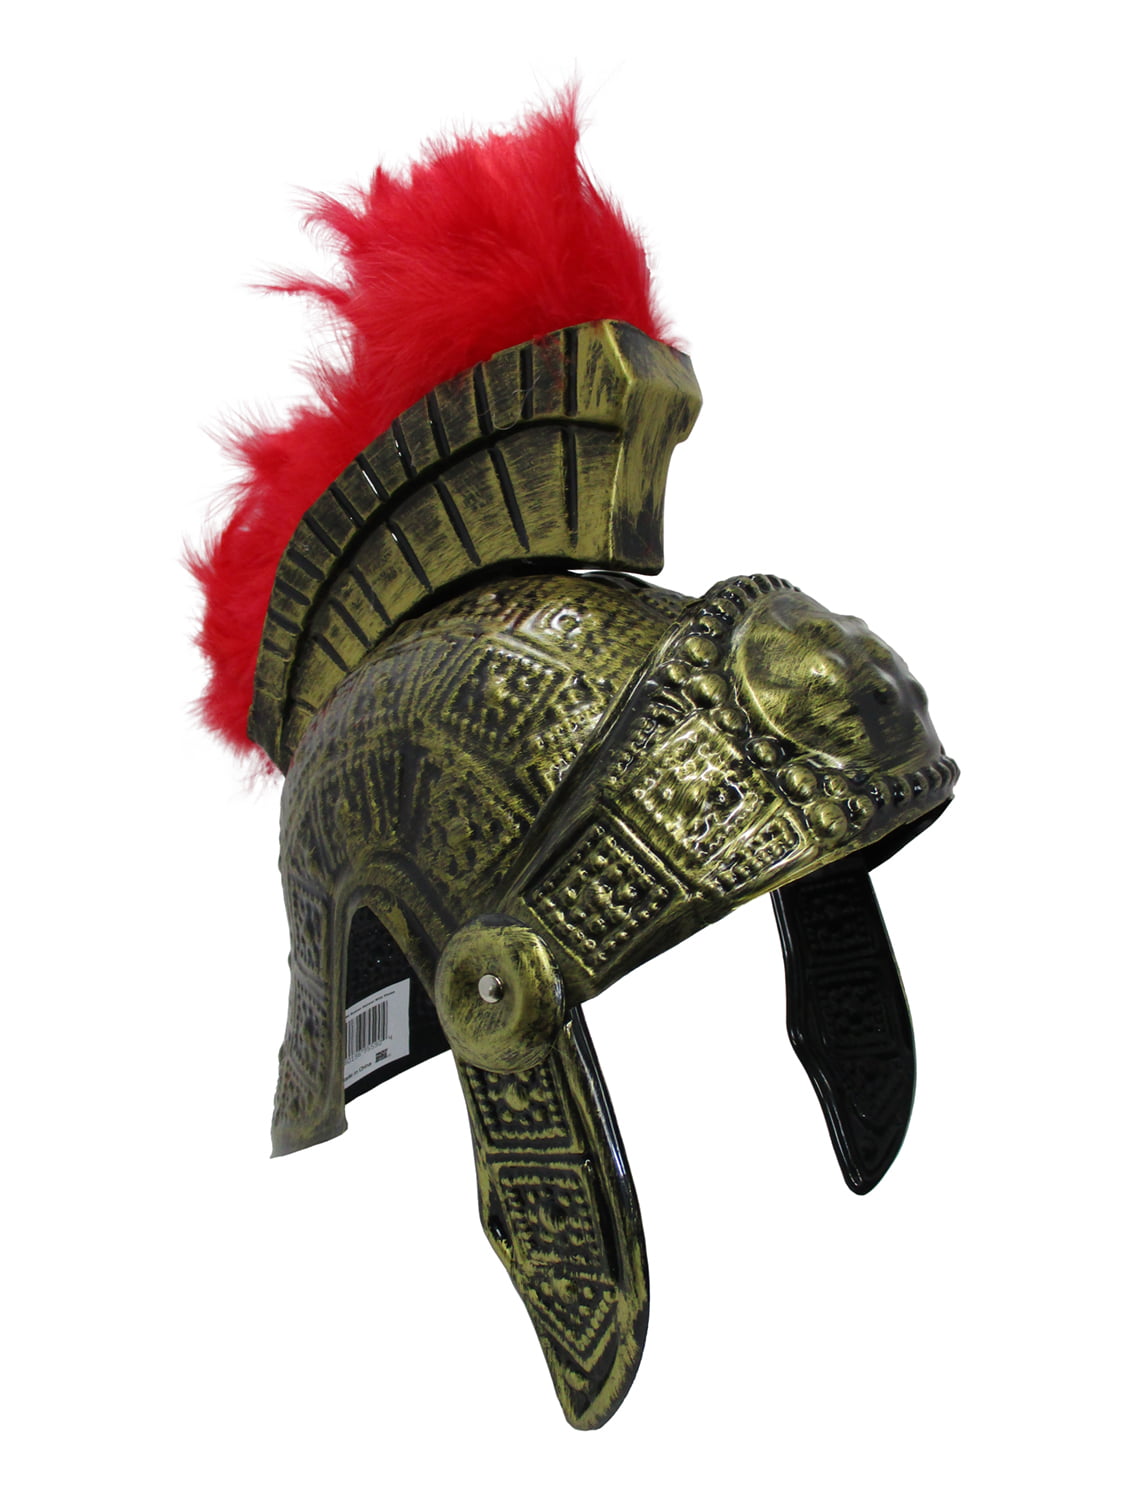 Gold Roman Helmet Spartan Greek With Red Feathers Armor Gladiator Adult Costume 